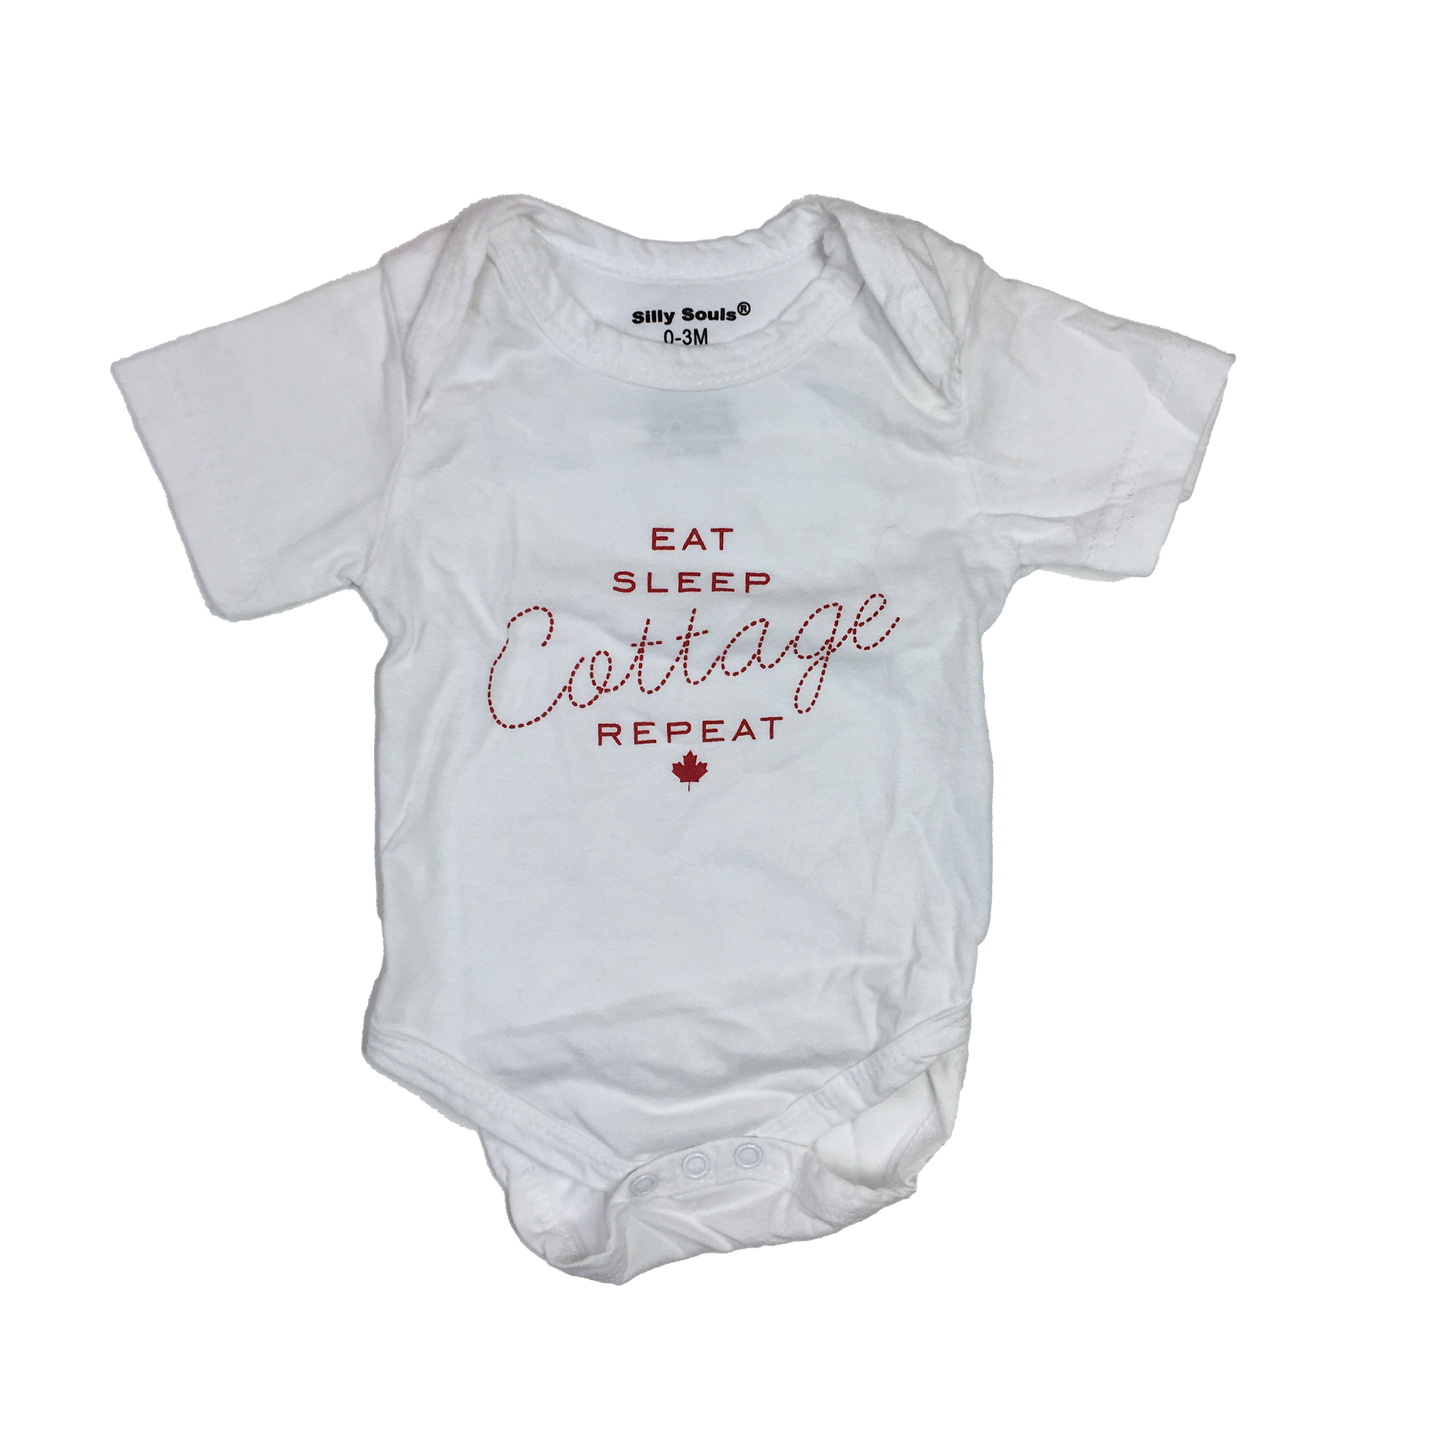 Silly Souls White Onesie "Eat Sleep Cottage Repeat" 0-3M